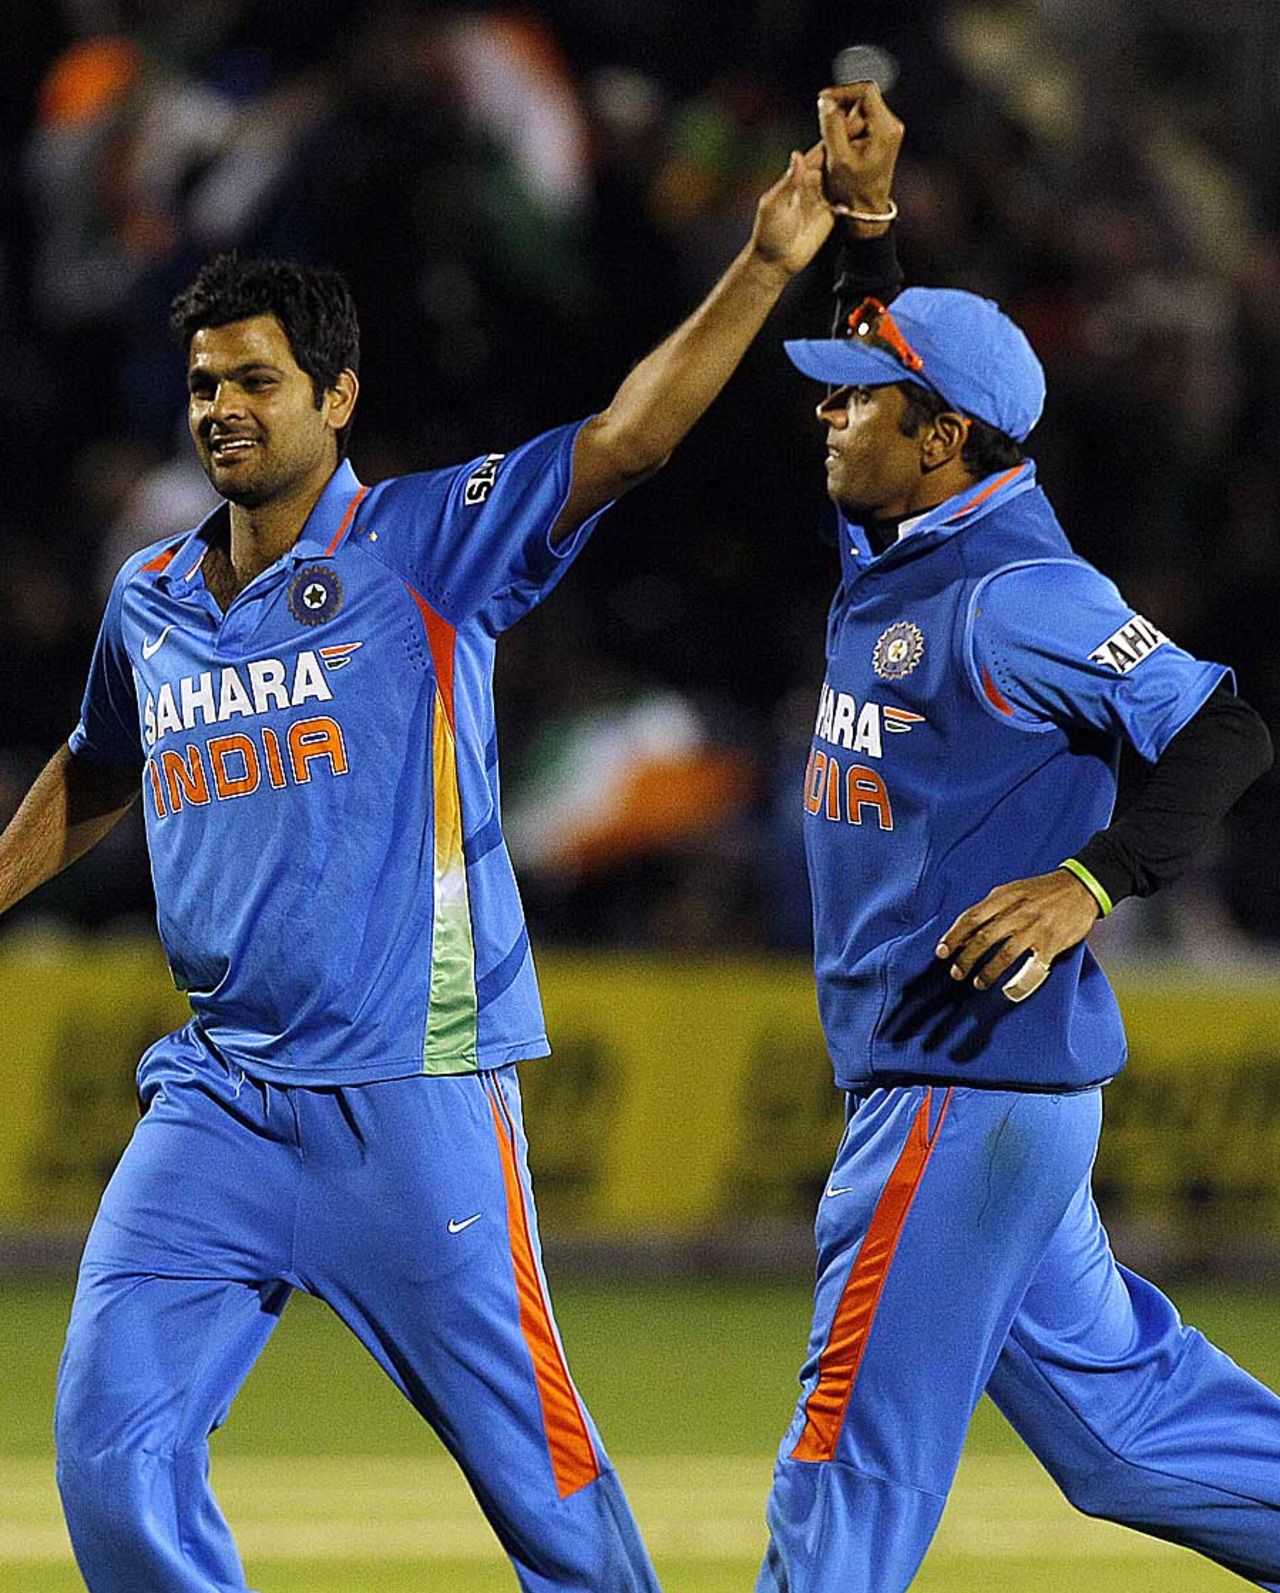 RP Singh and Rahul Dravid celebrate a wicket, England v India, 5th ODI, Cardiff, September 16, 2011